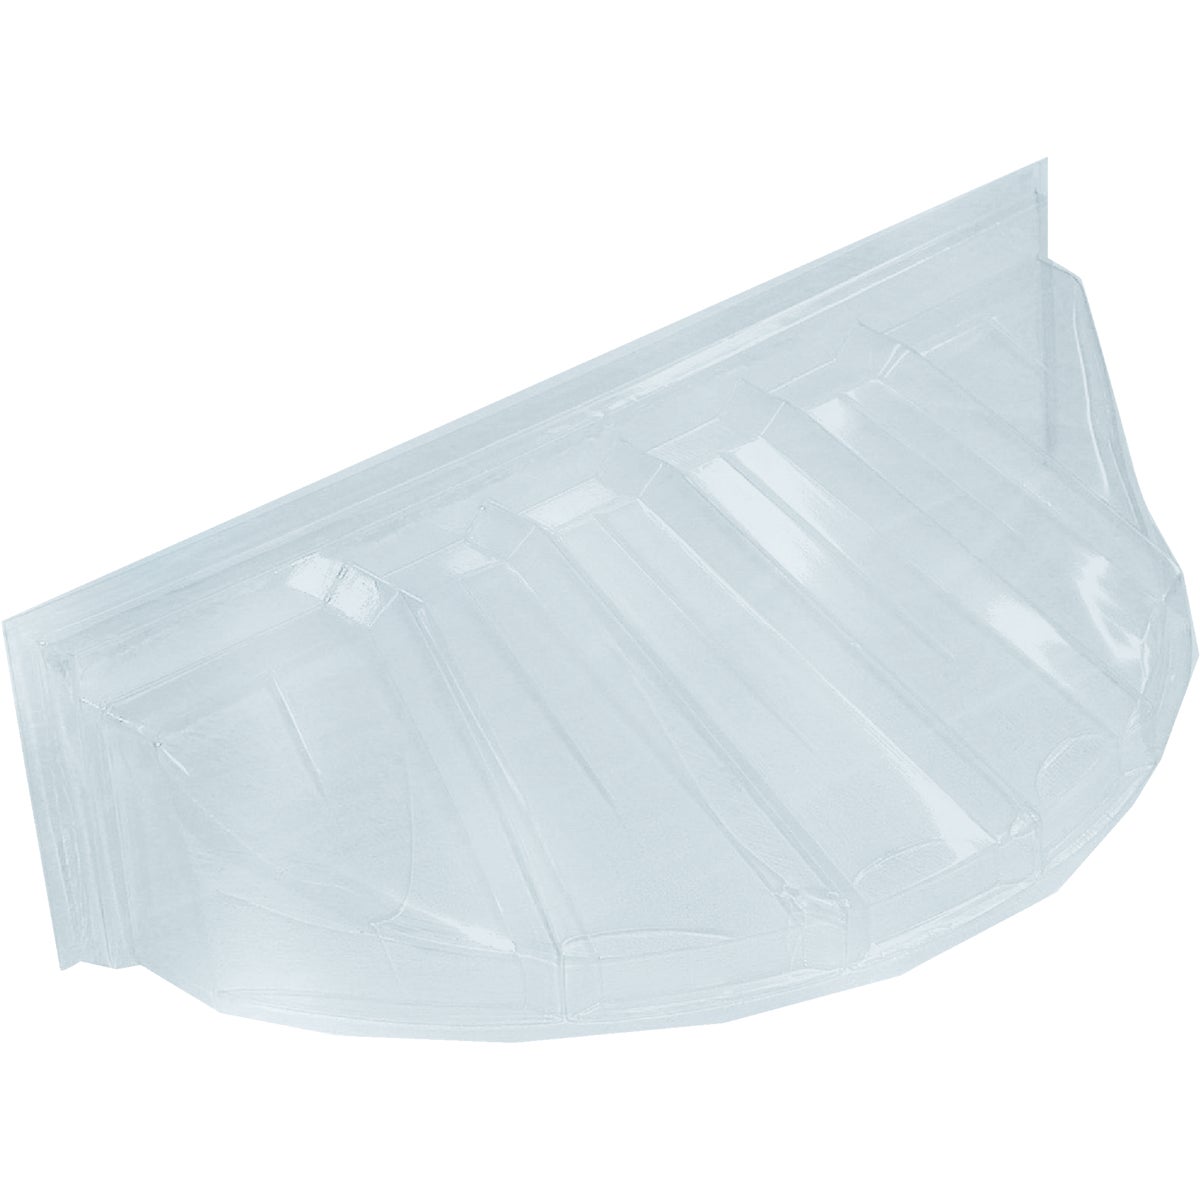 Item 100014, Window well cover fits over window wells of 40" or less in length and 